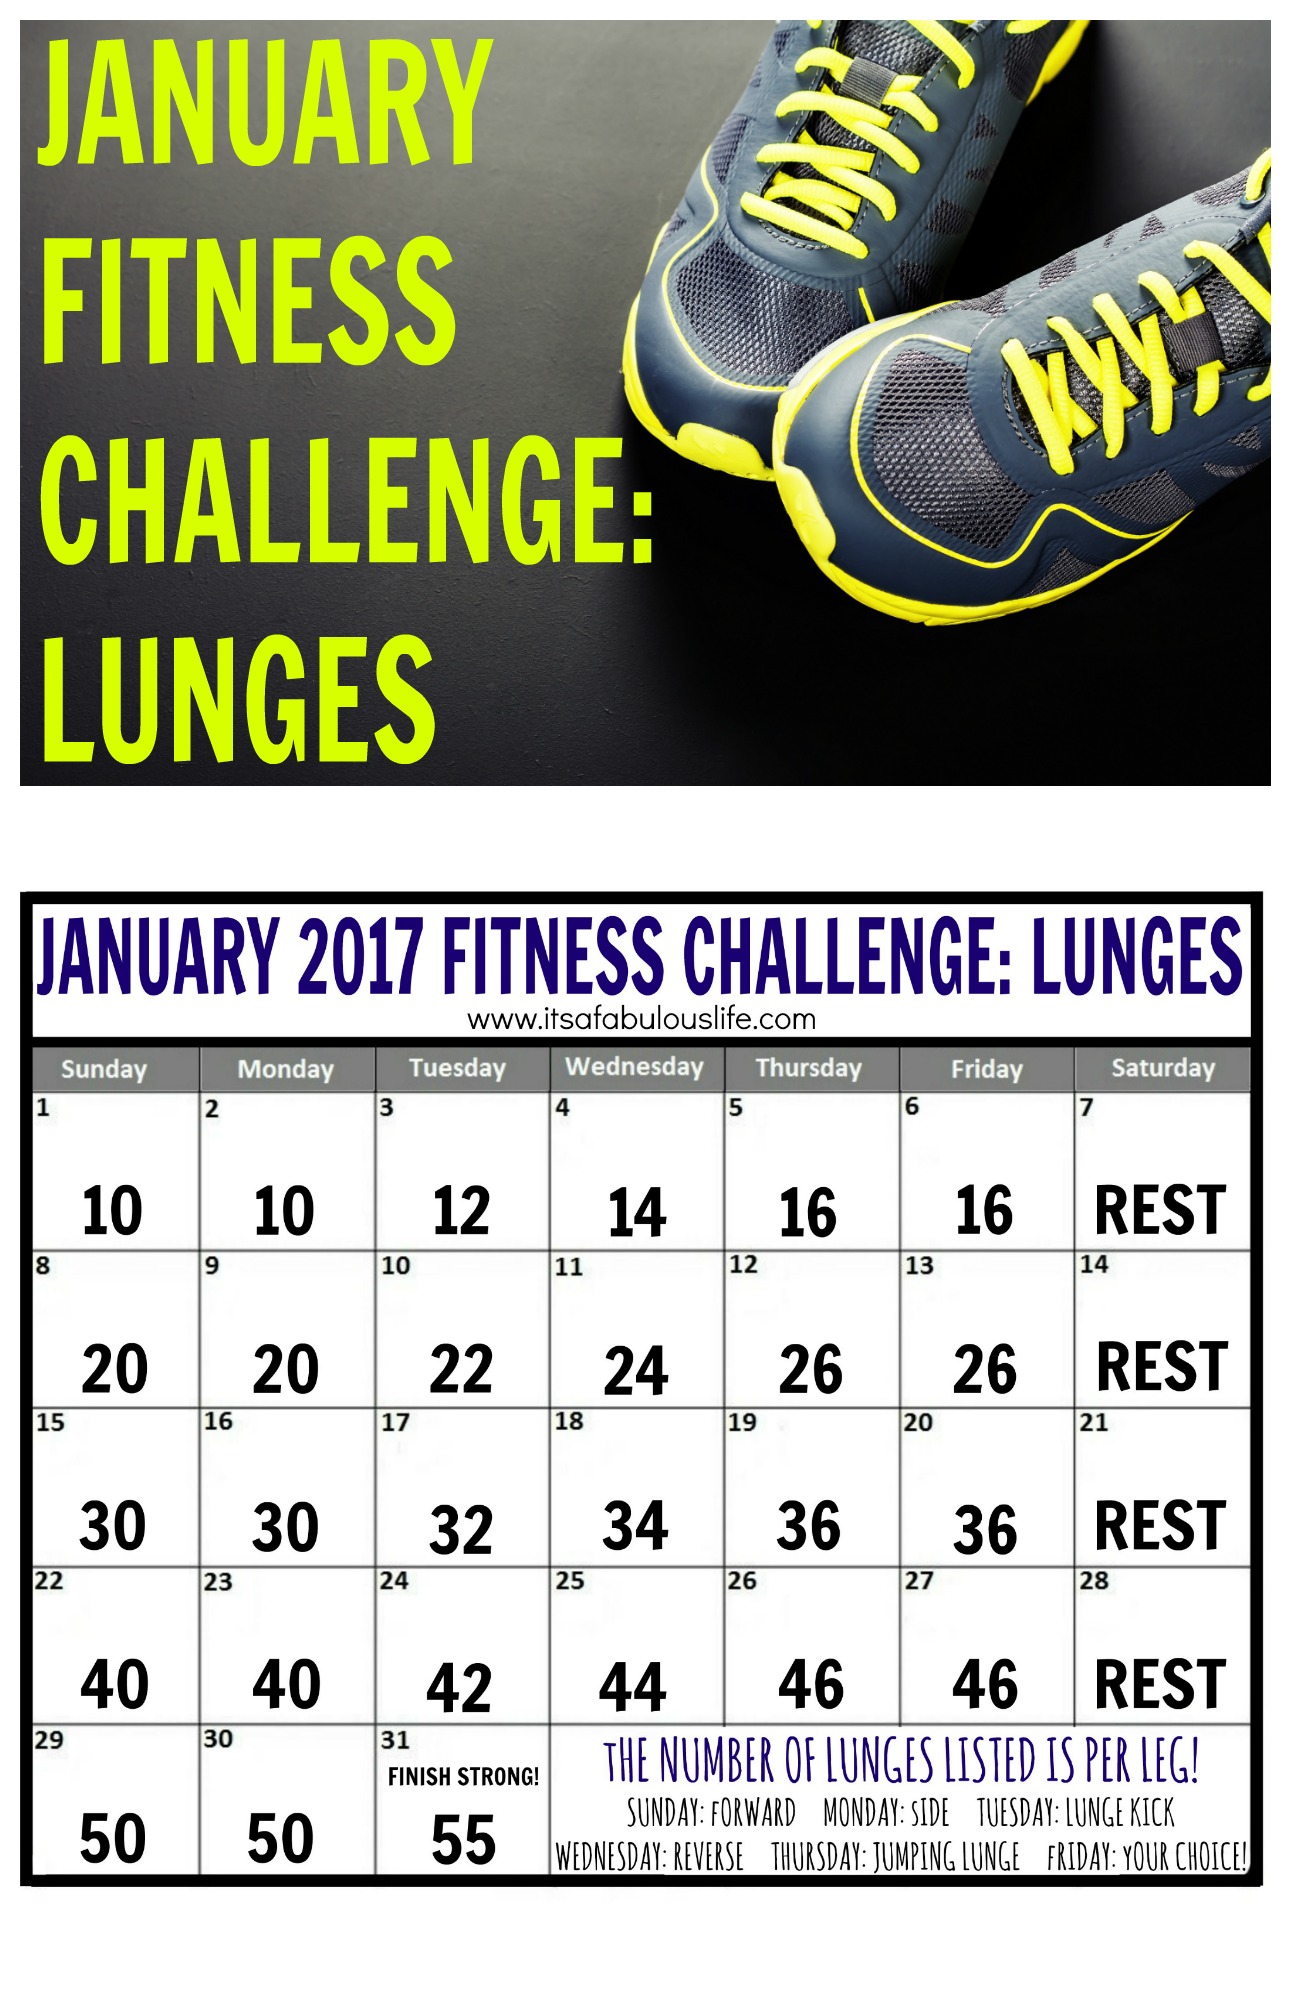 January Fitness Challenge: Lunges